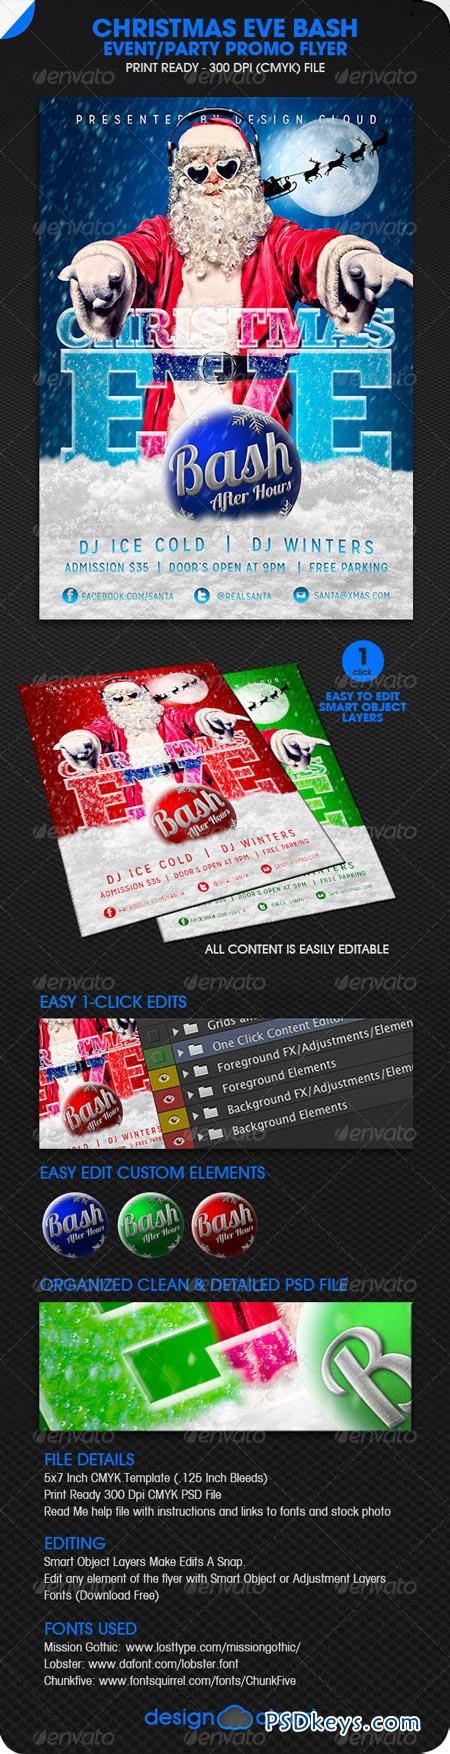 Christmas Eve Bash Party Event Flyer 6214010